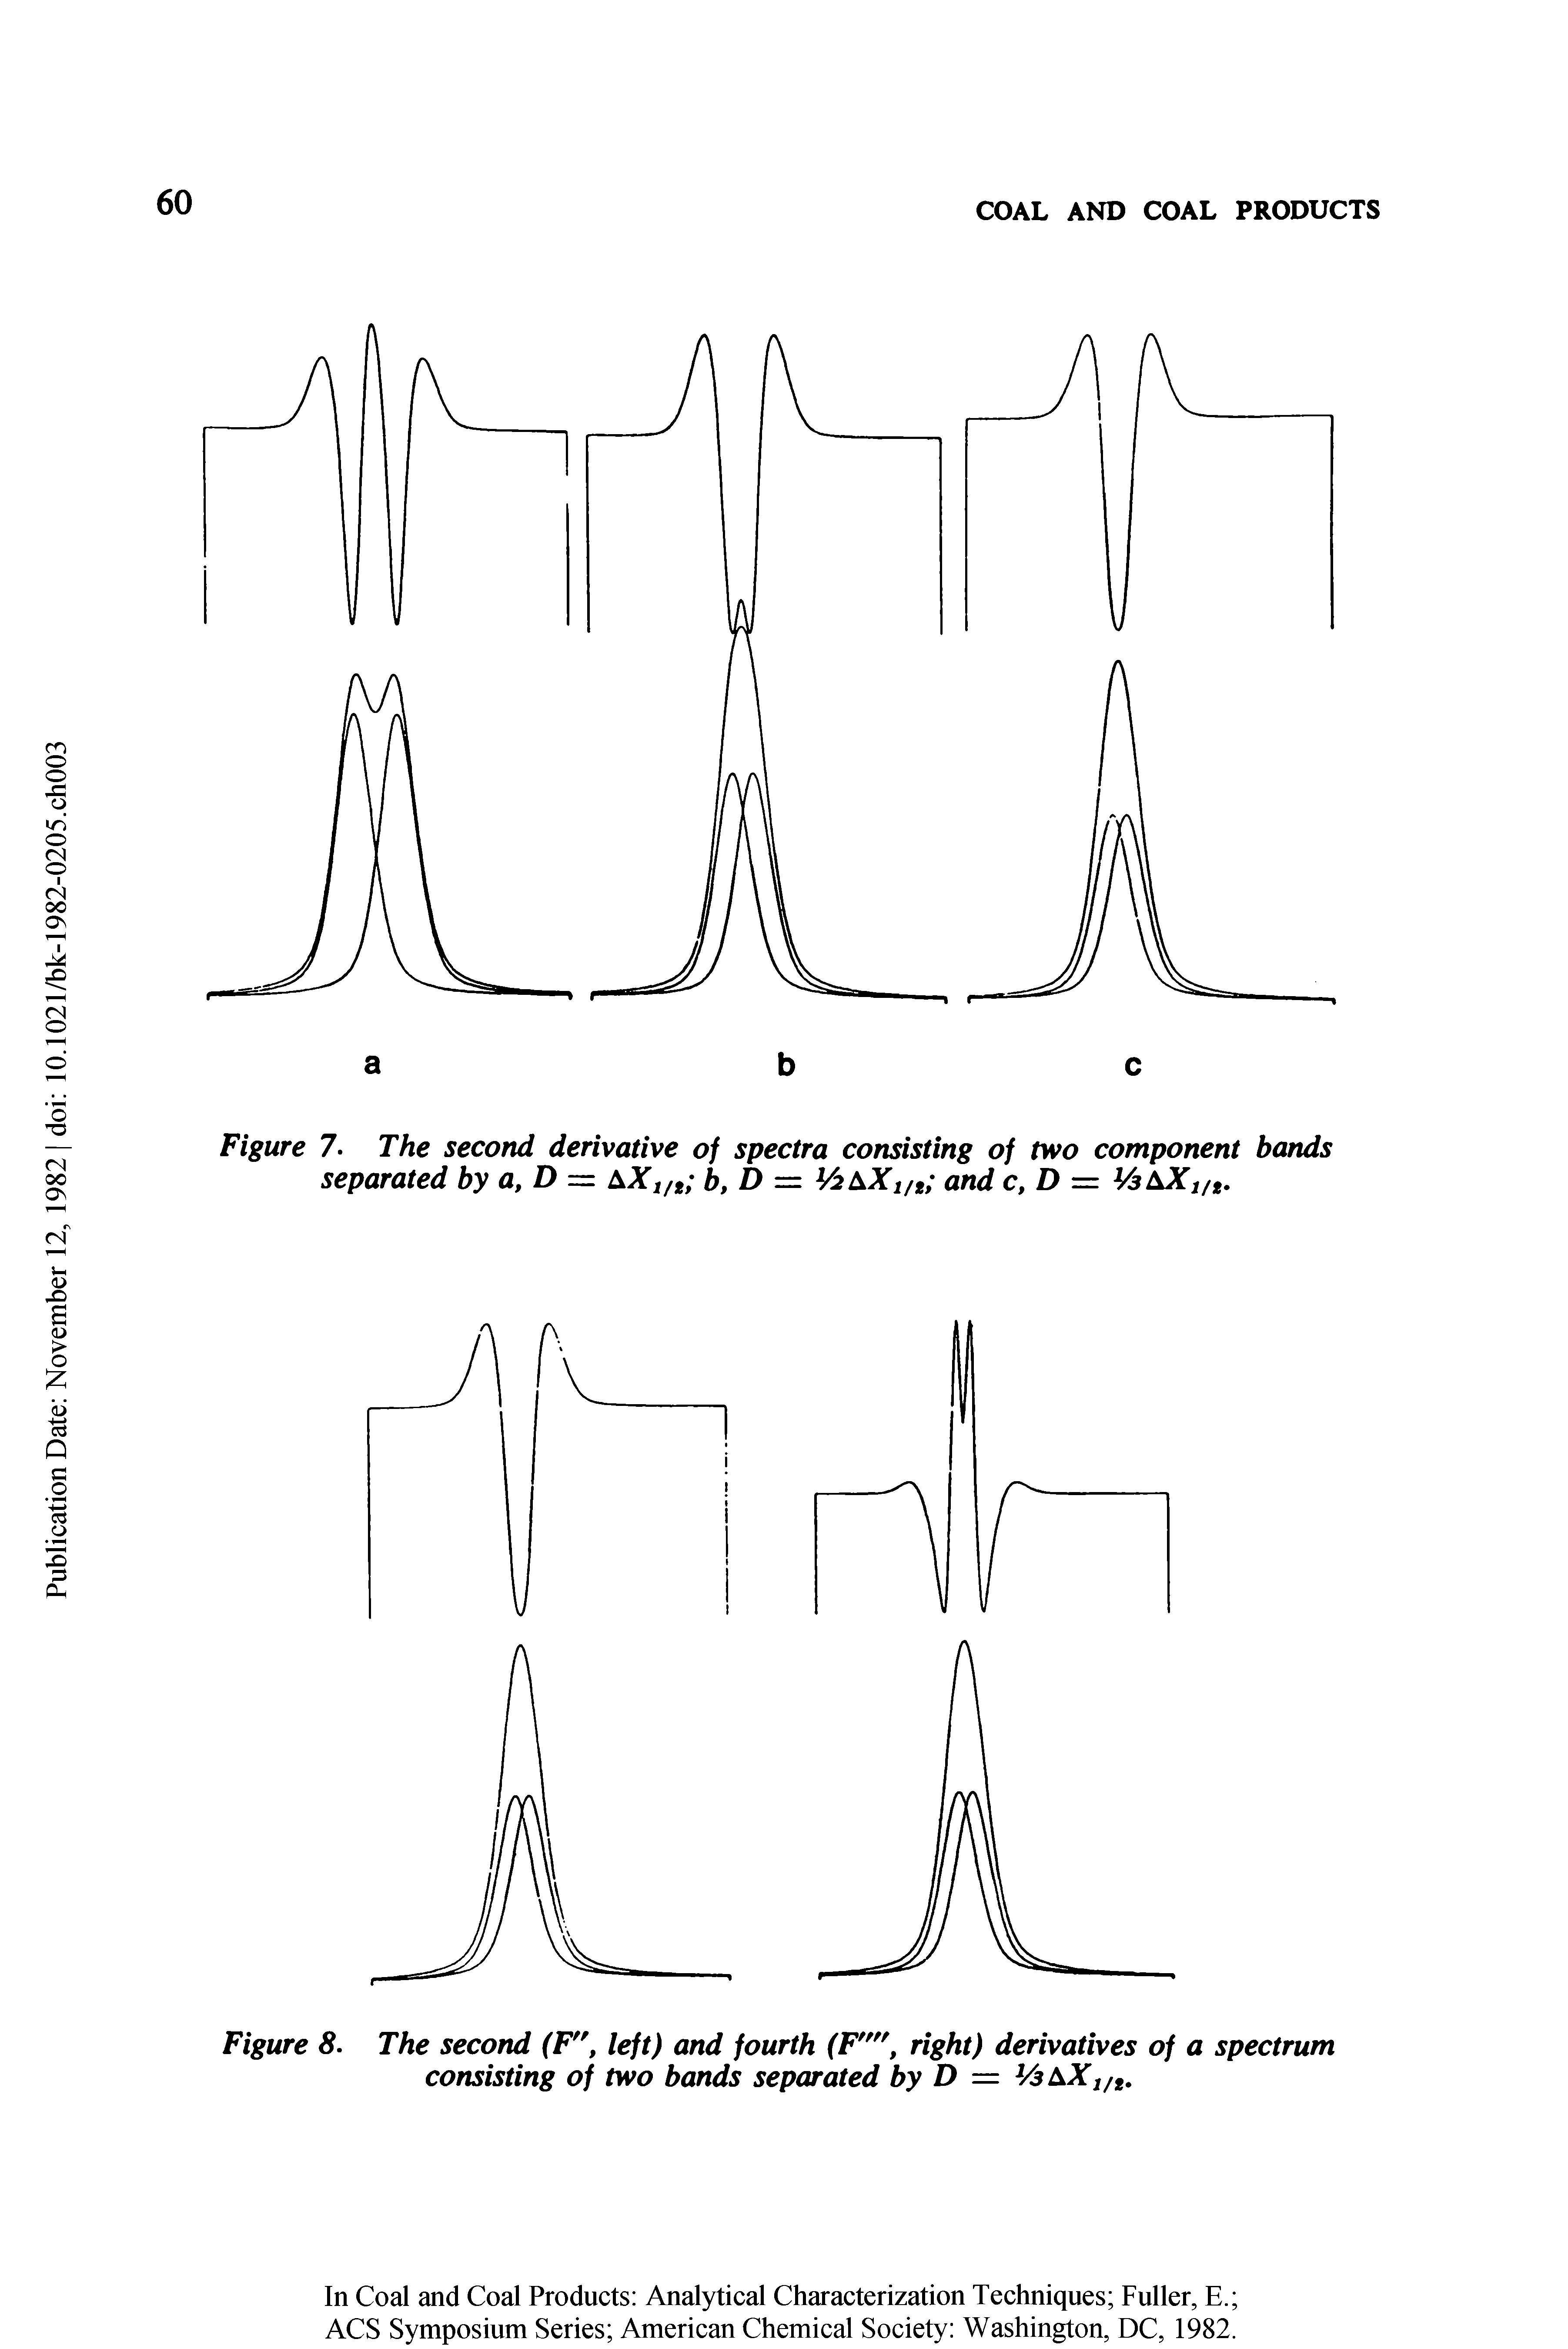 Figure 7. The second derivative of spectra consisting of two component bands separated by a, D = AA ,/ b, D = V2 Xift and c, D = Va nt,...